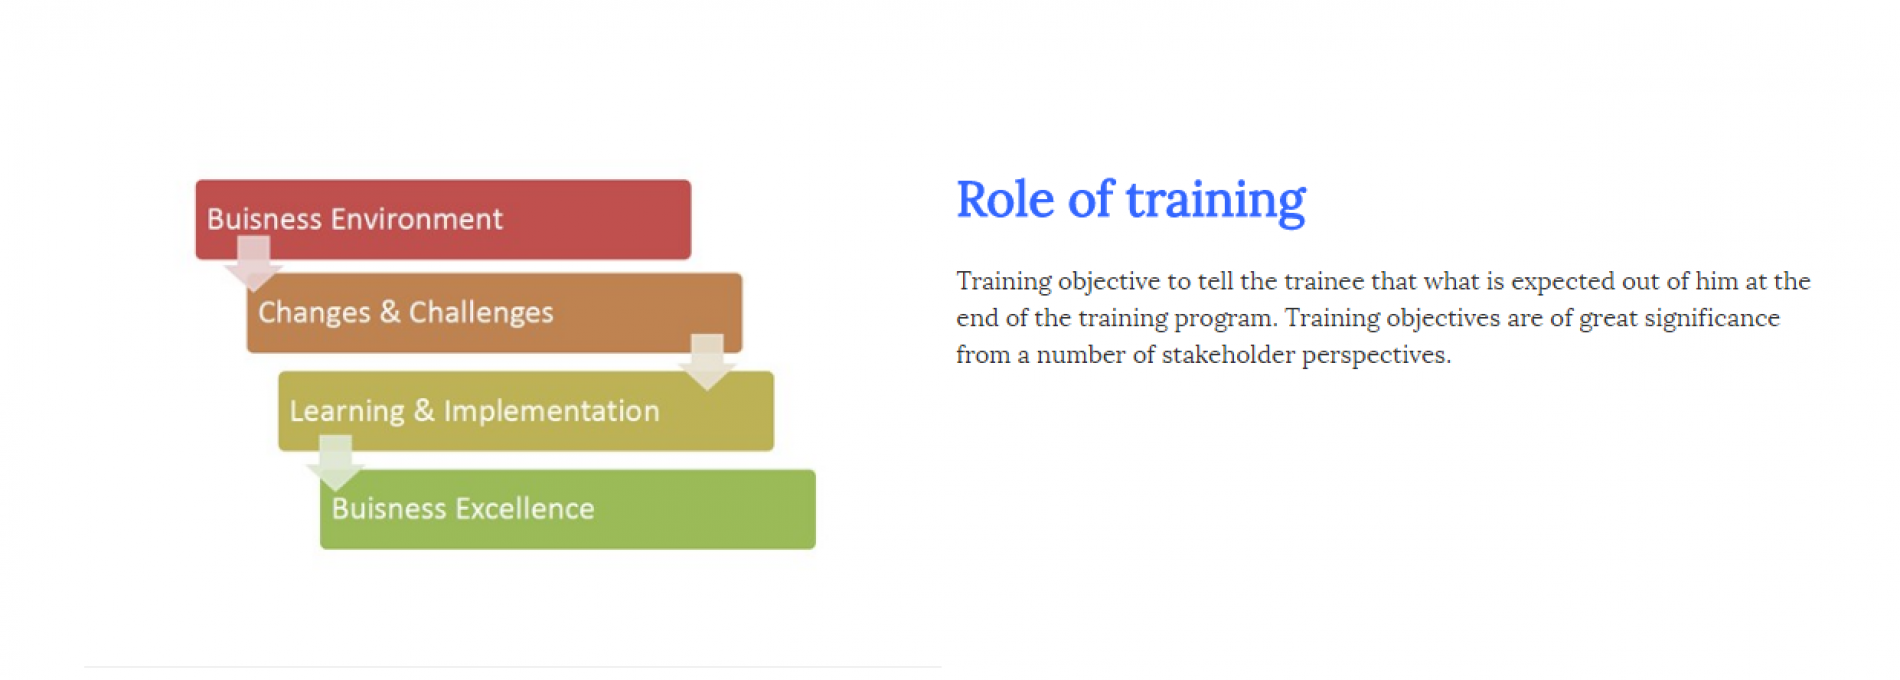 Role of training